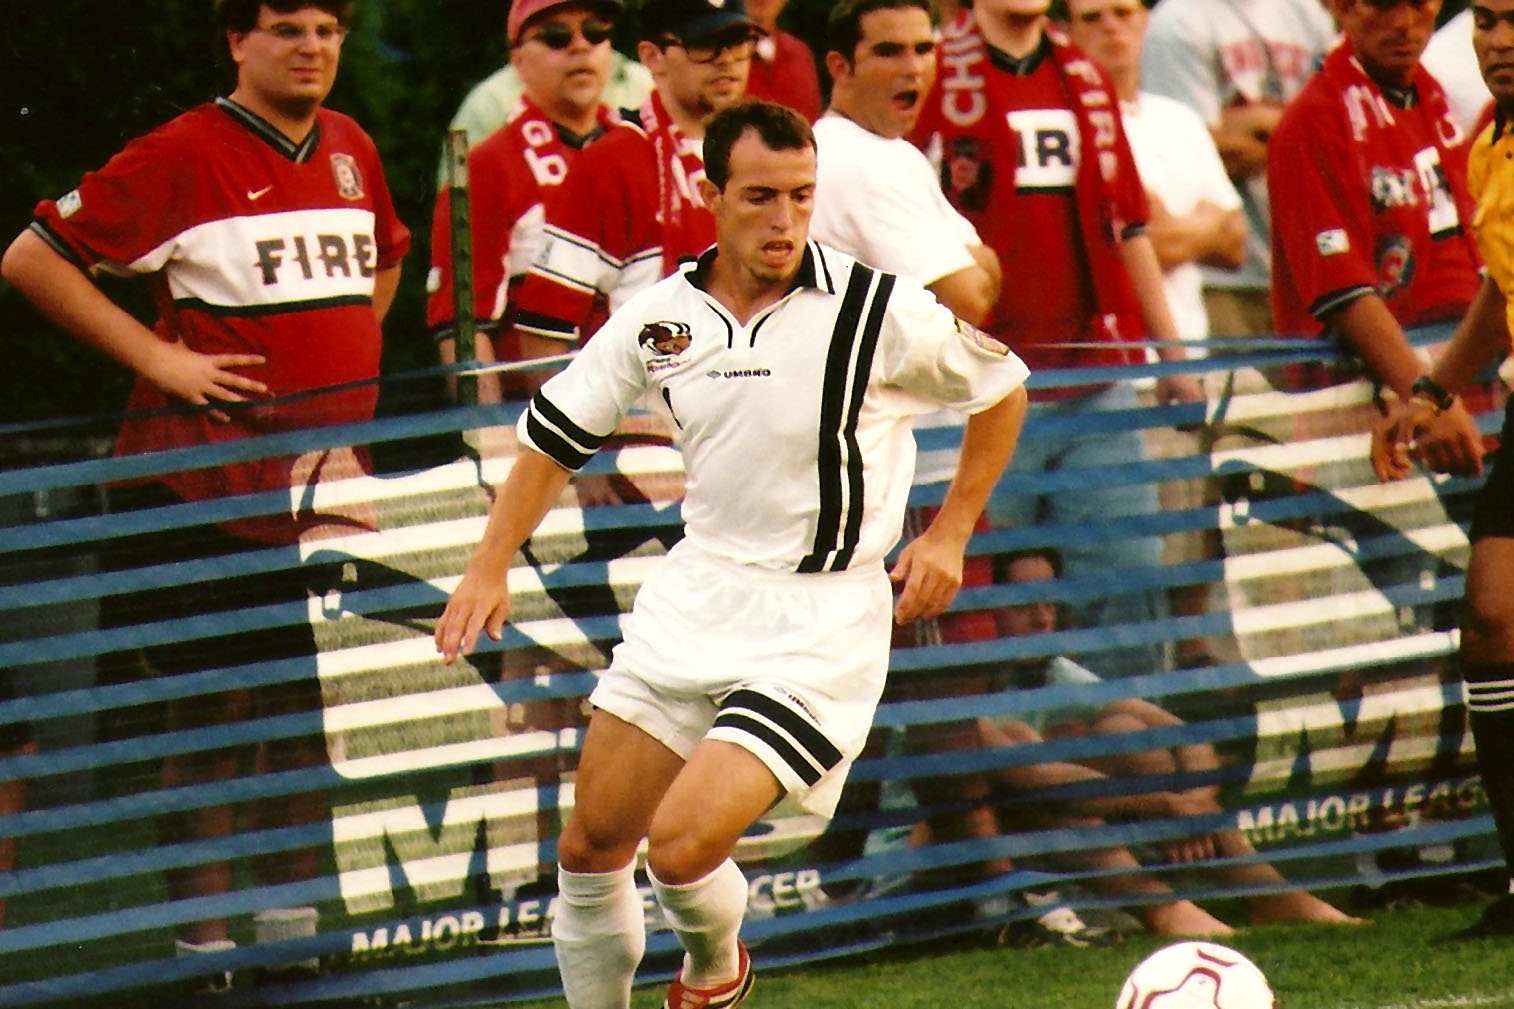 Gary DePalma controls the ball in the Hounds' U.S. Open Cup quarterfinal against the Chicago Fire on July 24, 2001. (Photo courtesy of Gary DePalma)